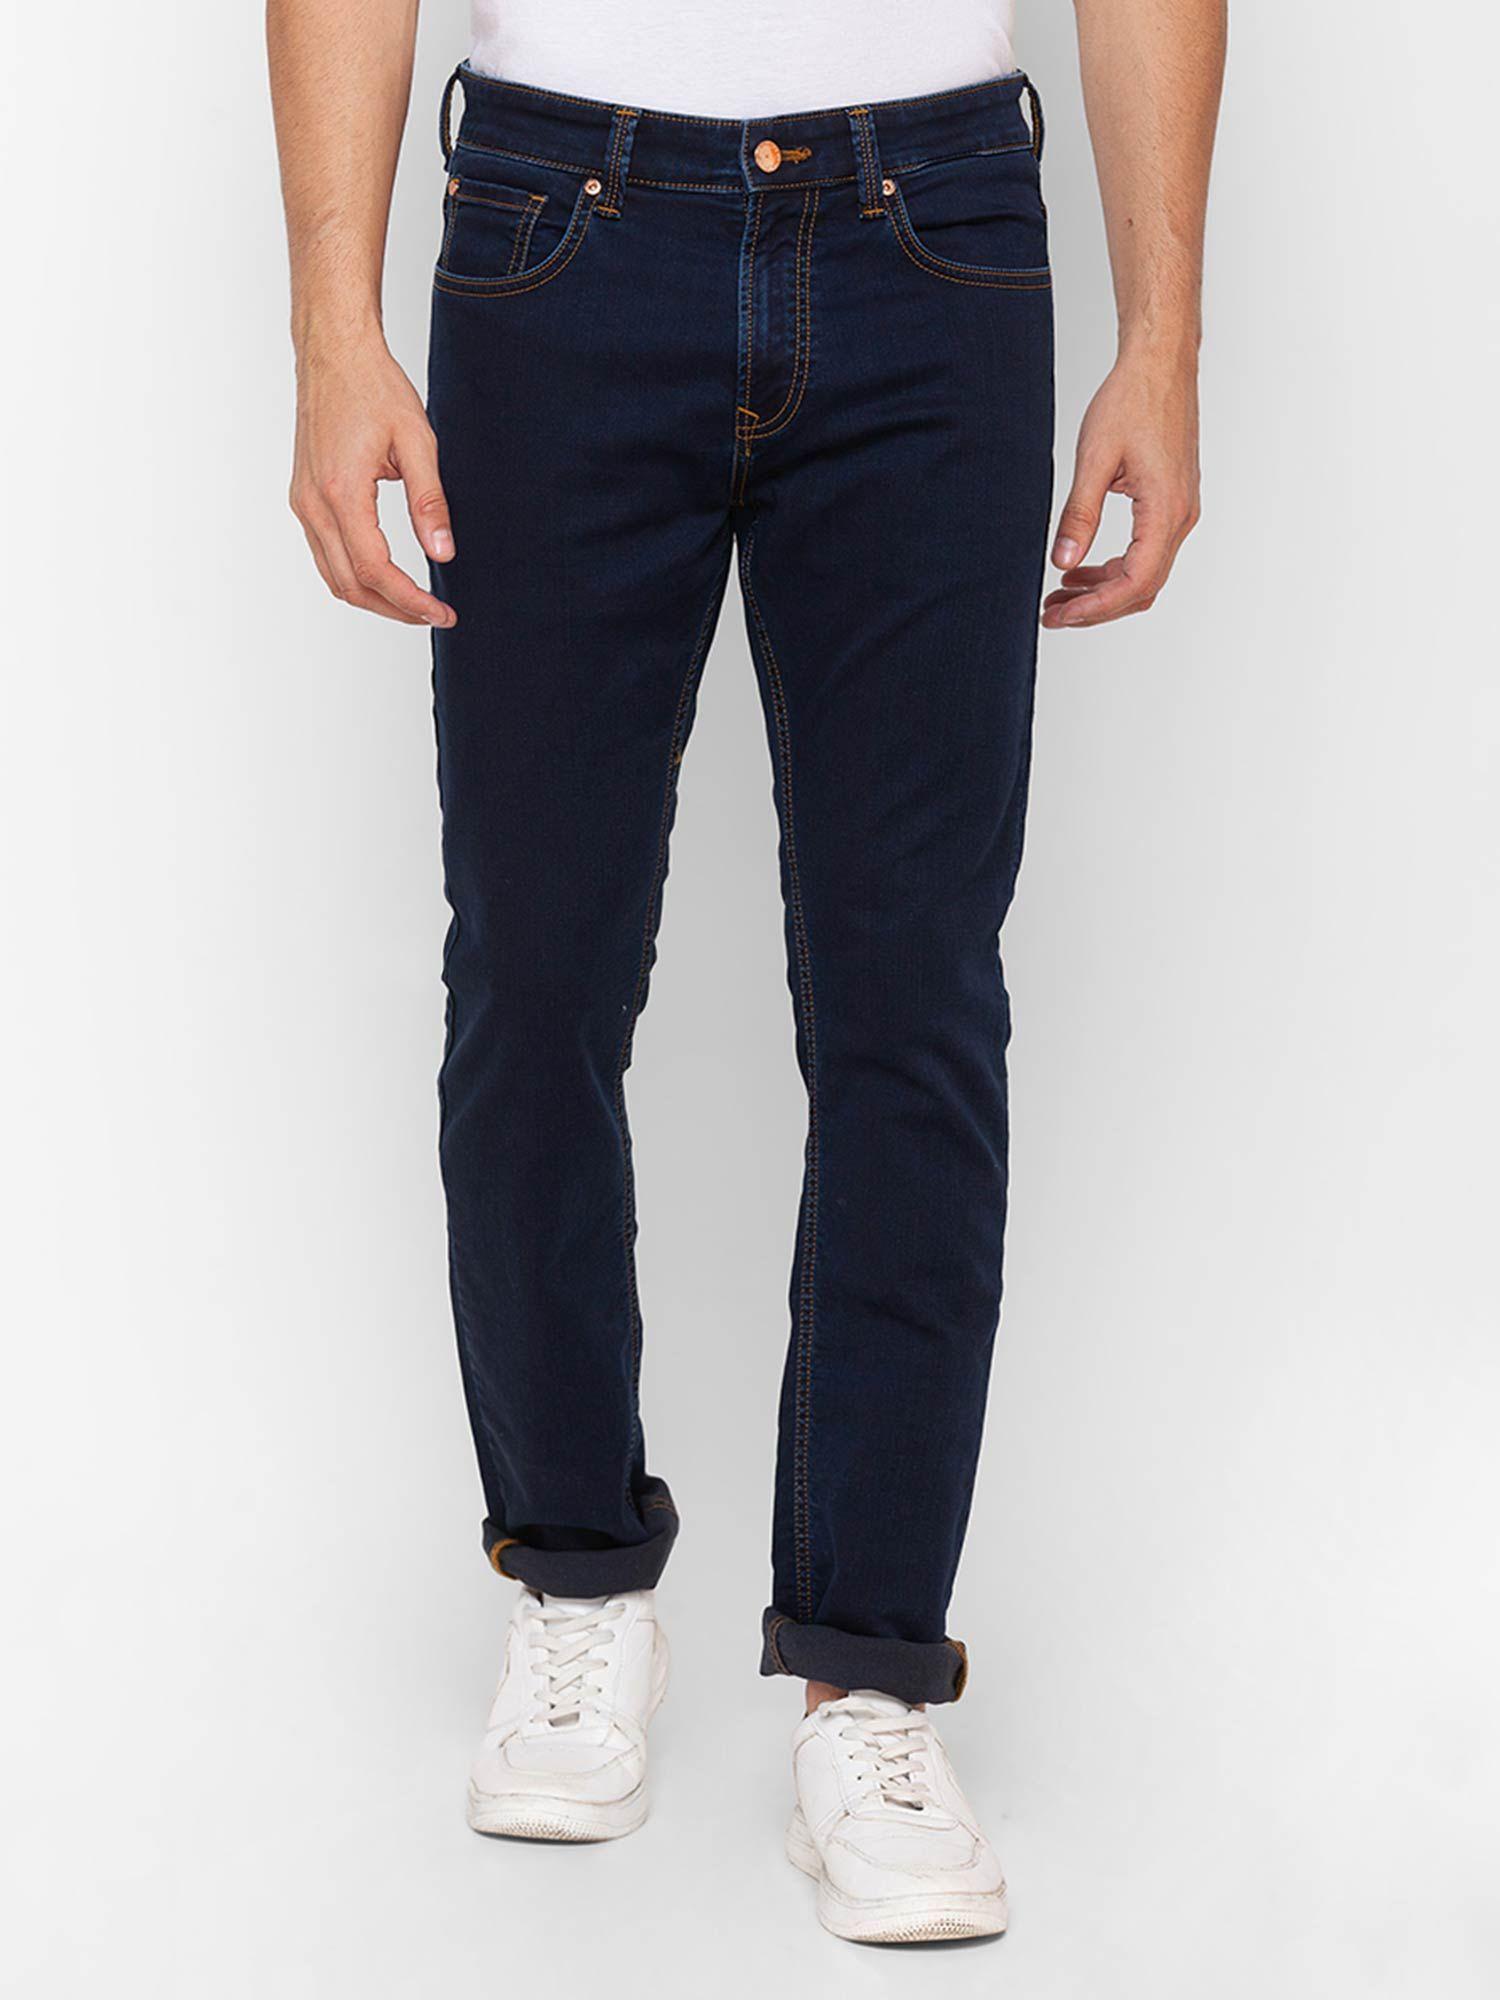 raw-blue-cotton-regular-fit-narrow-length-jeans-for-men-(rover)